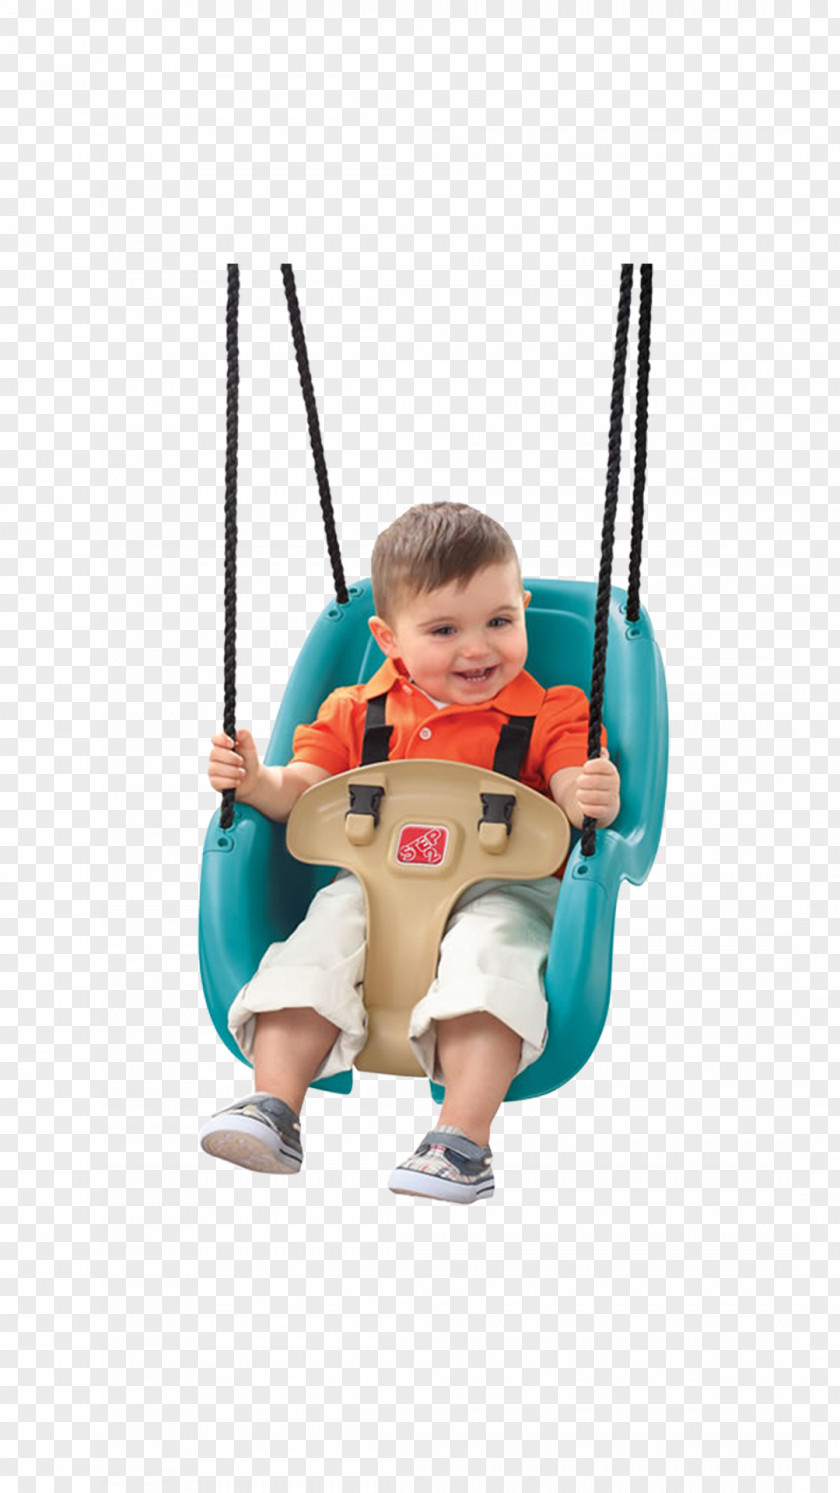 Infant Amazon.com Swing Toddler The Step2 Company LLC PNG